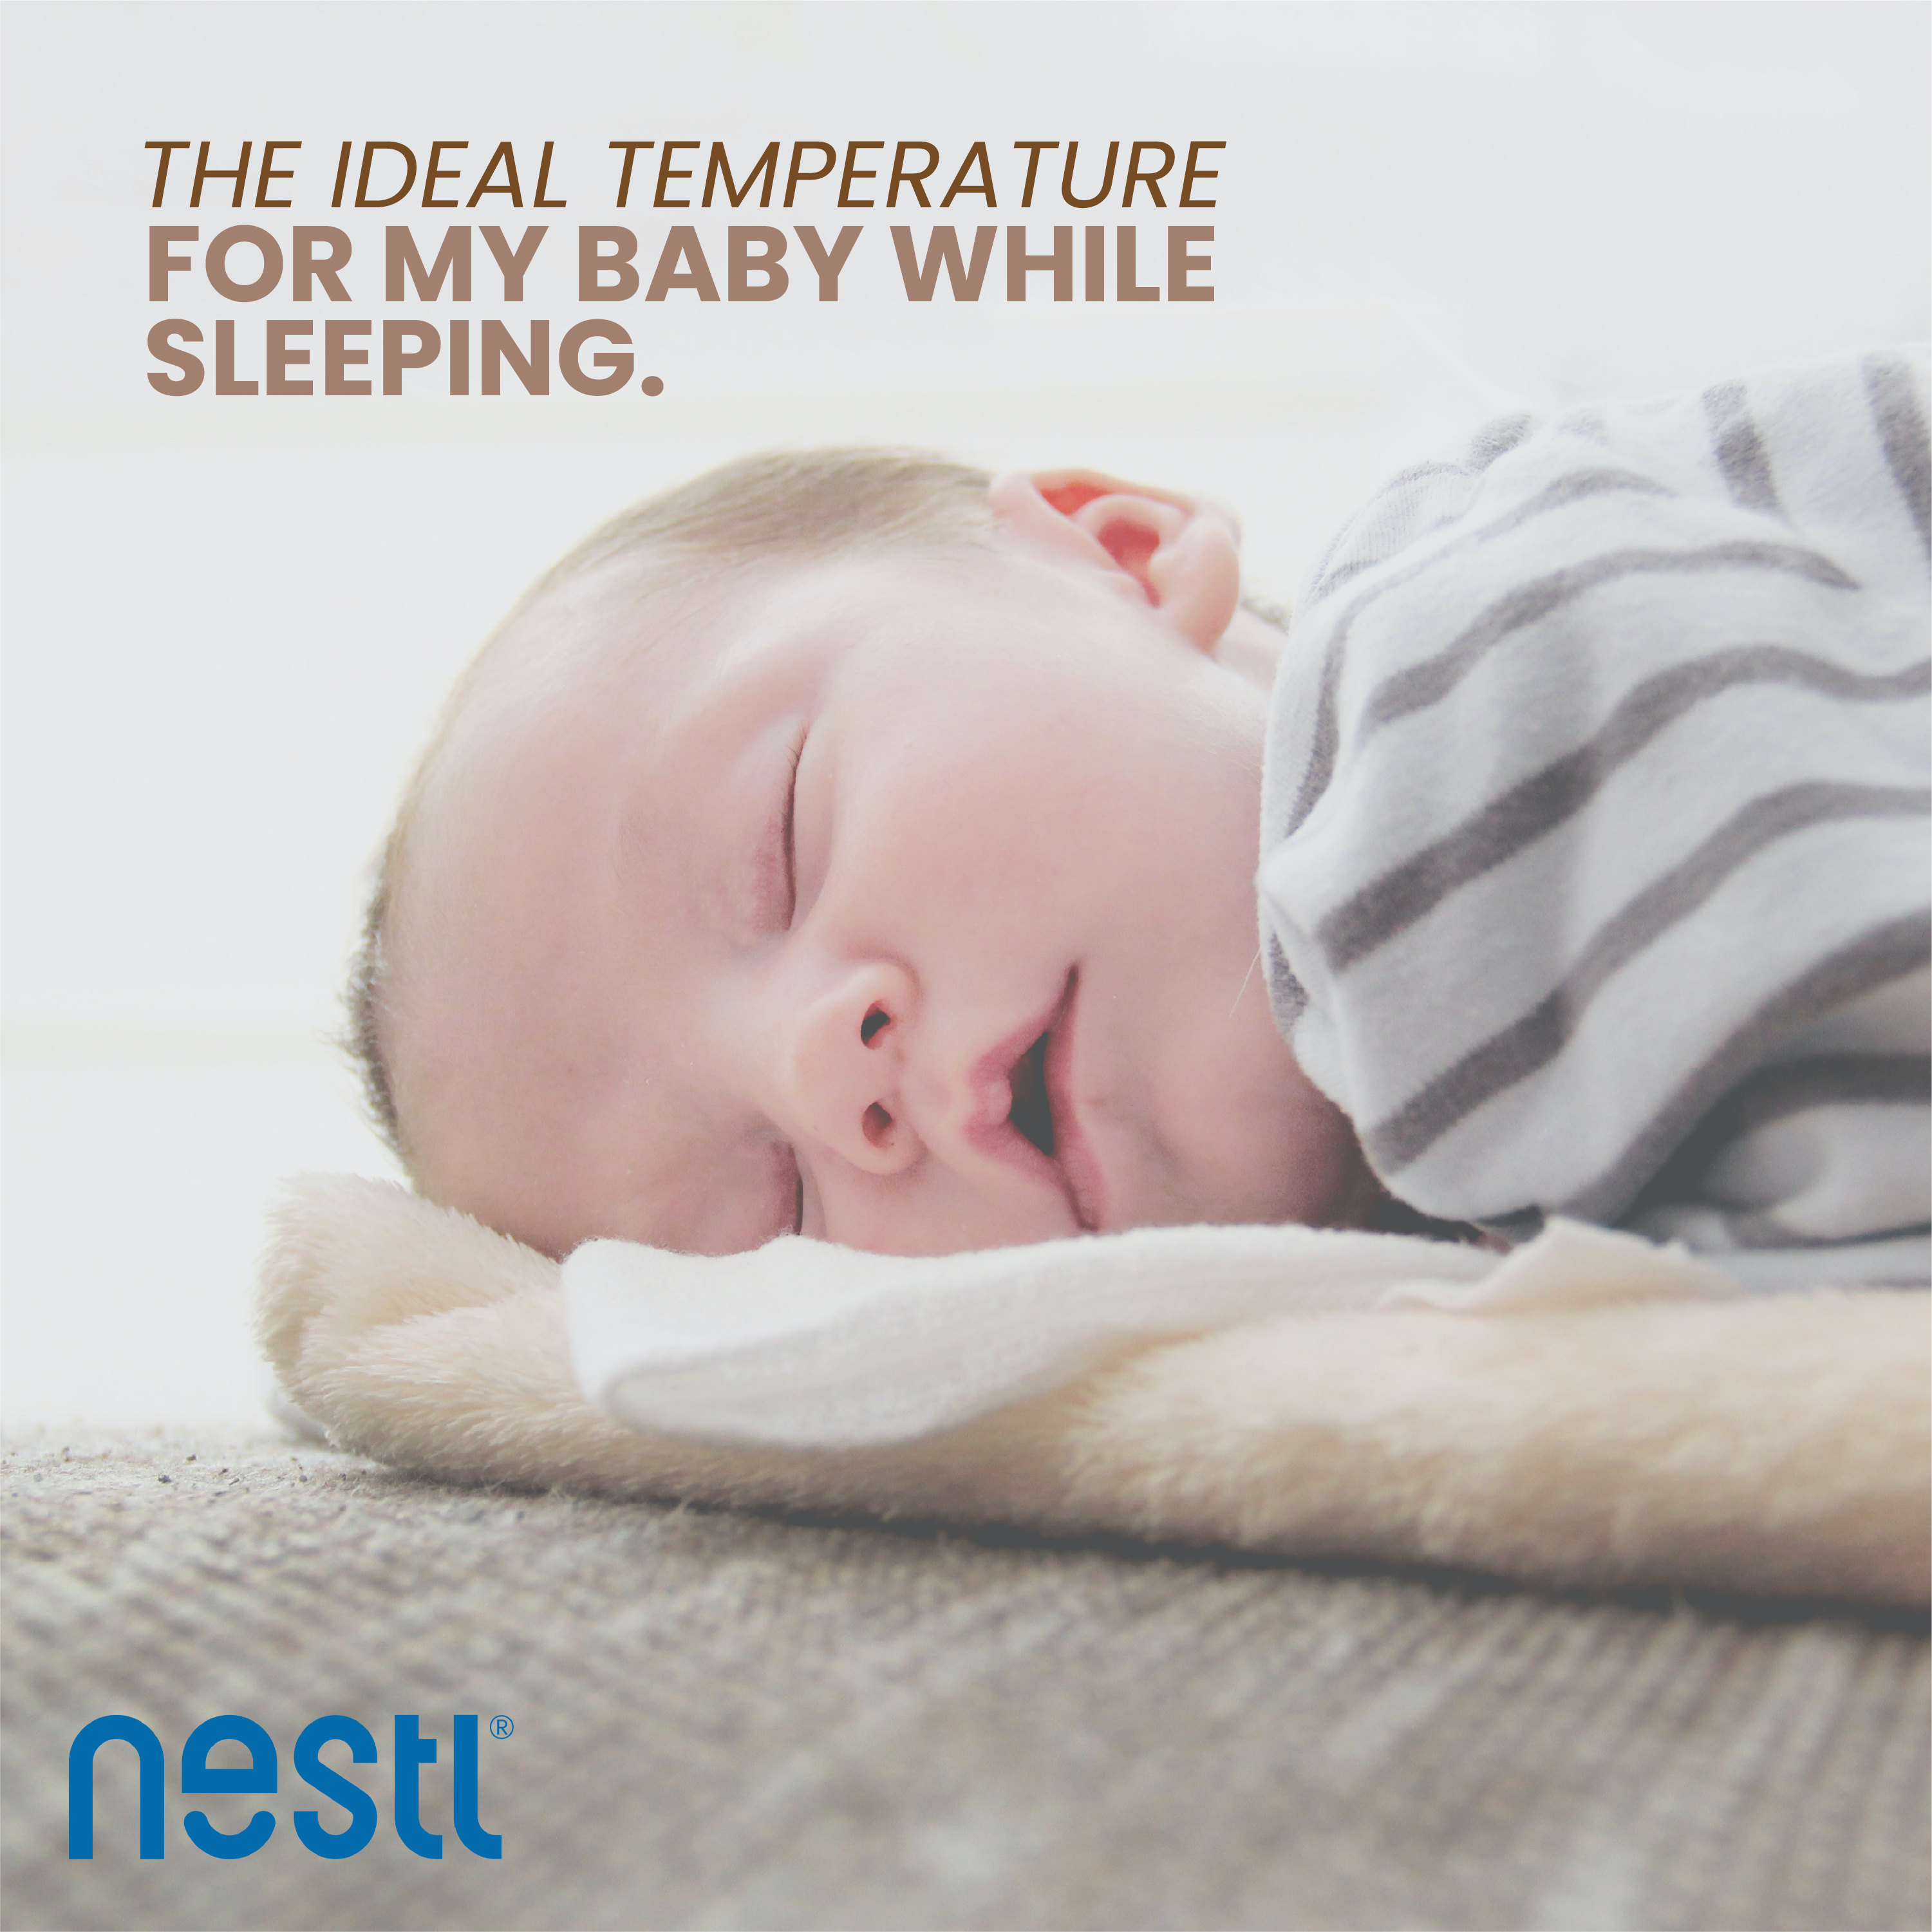 What is the ideal temperature for my baby's room?